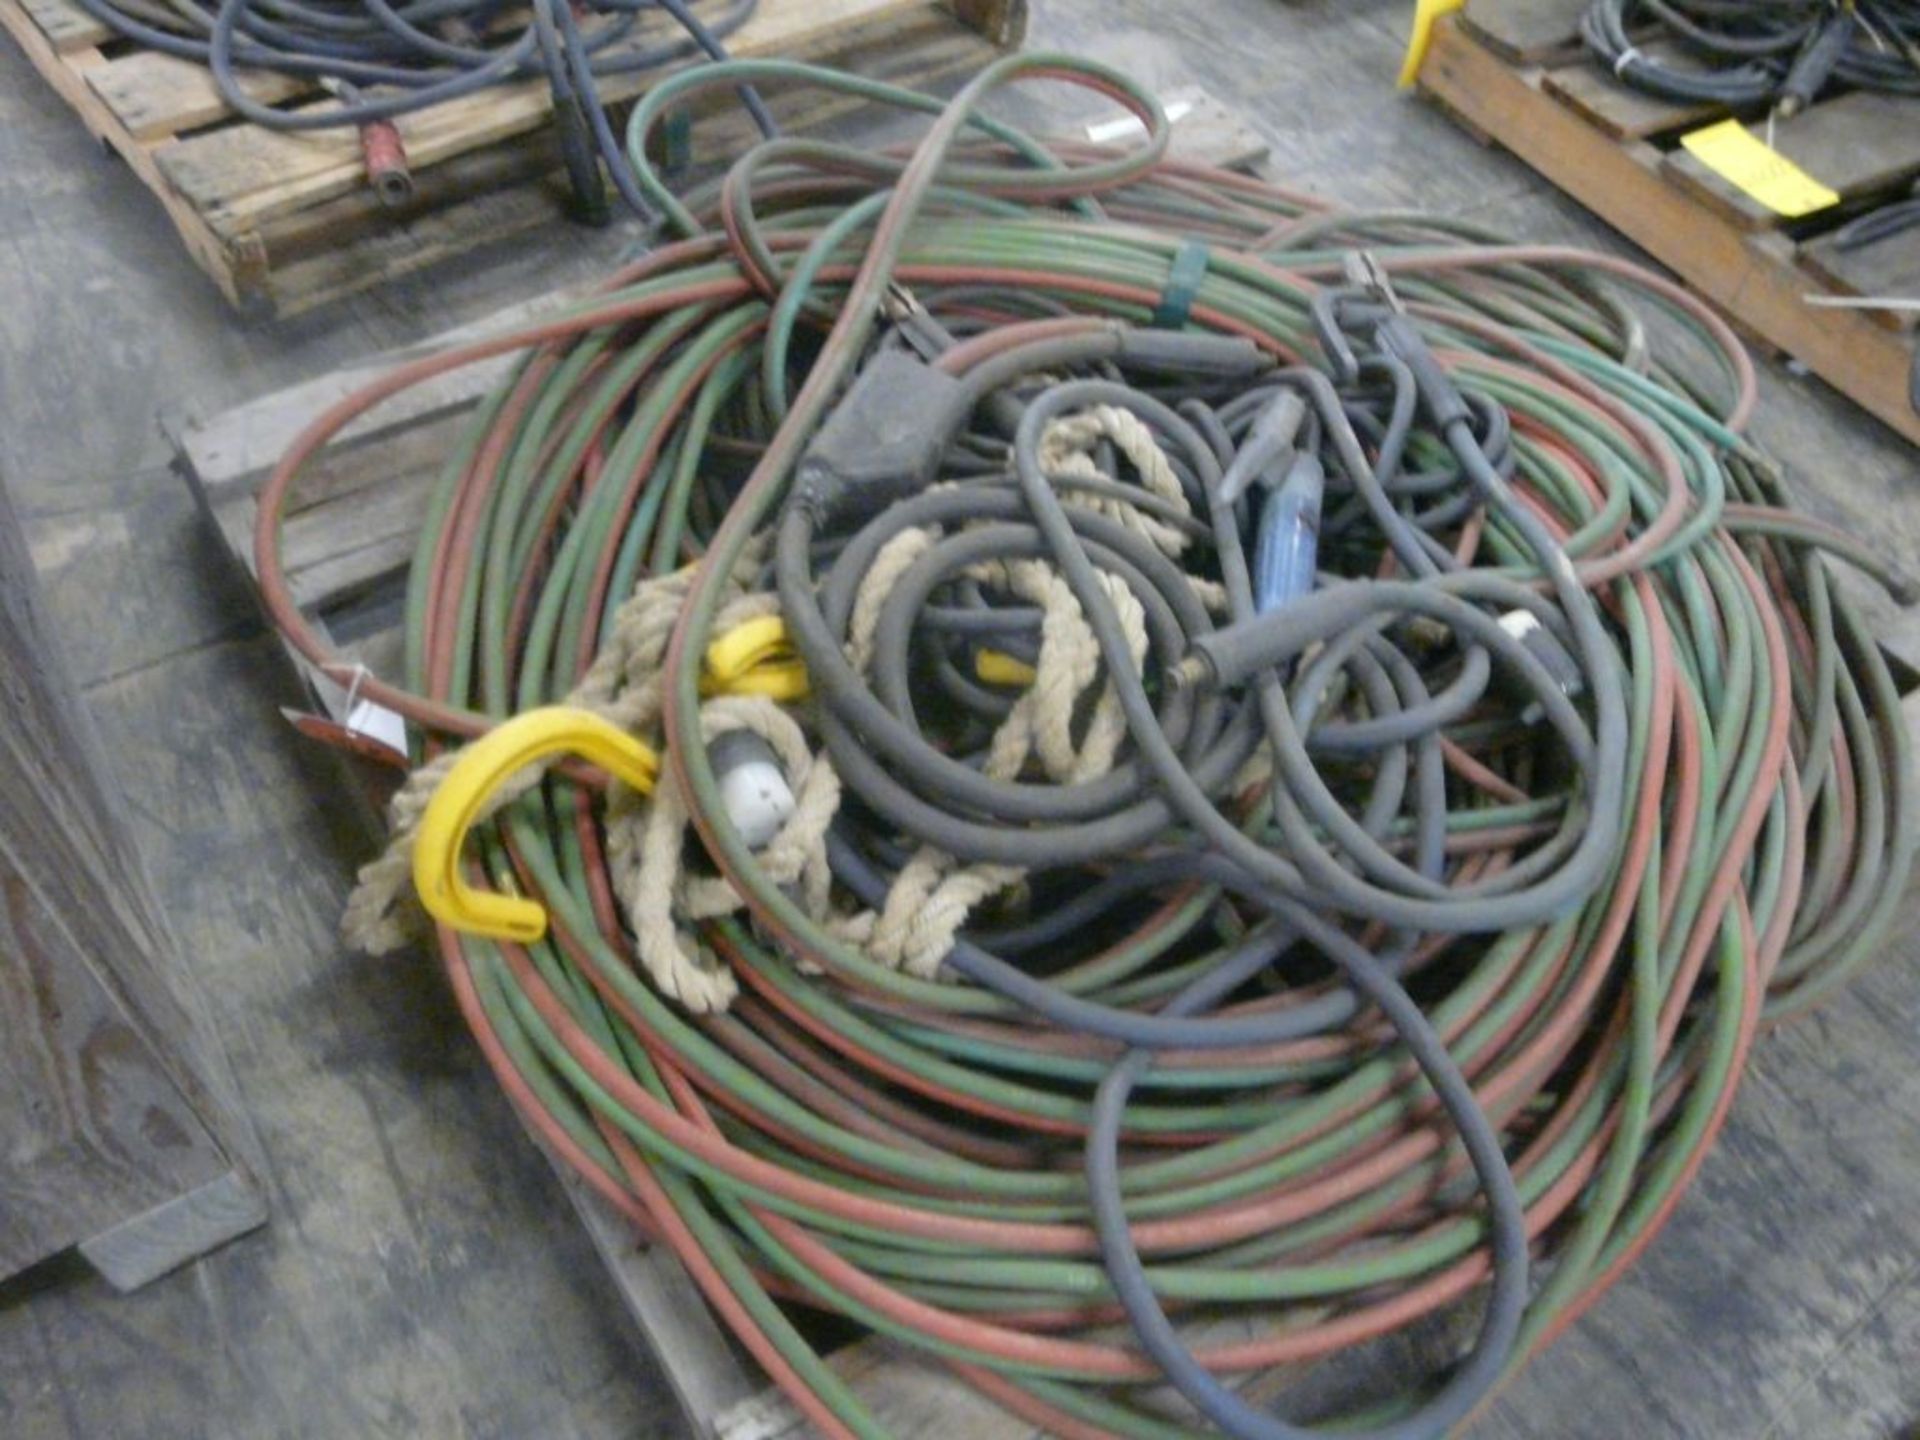 Lot of Assorted Leads, Power Cables, and Rope|144 lbs Including Pallet; Tag: 225338 - Image 4 of 4